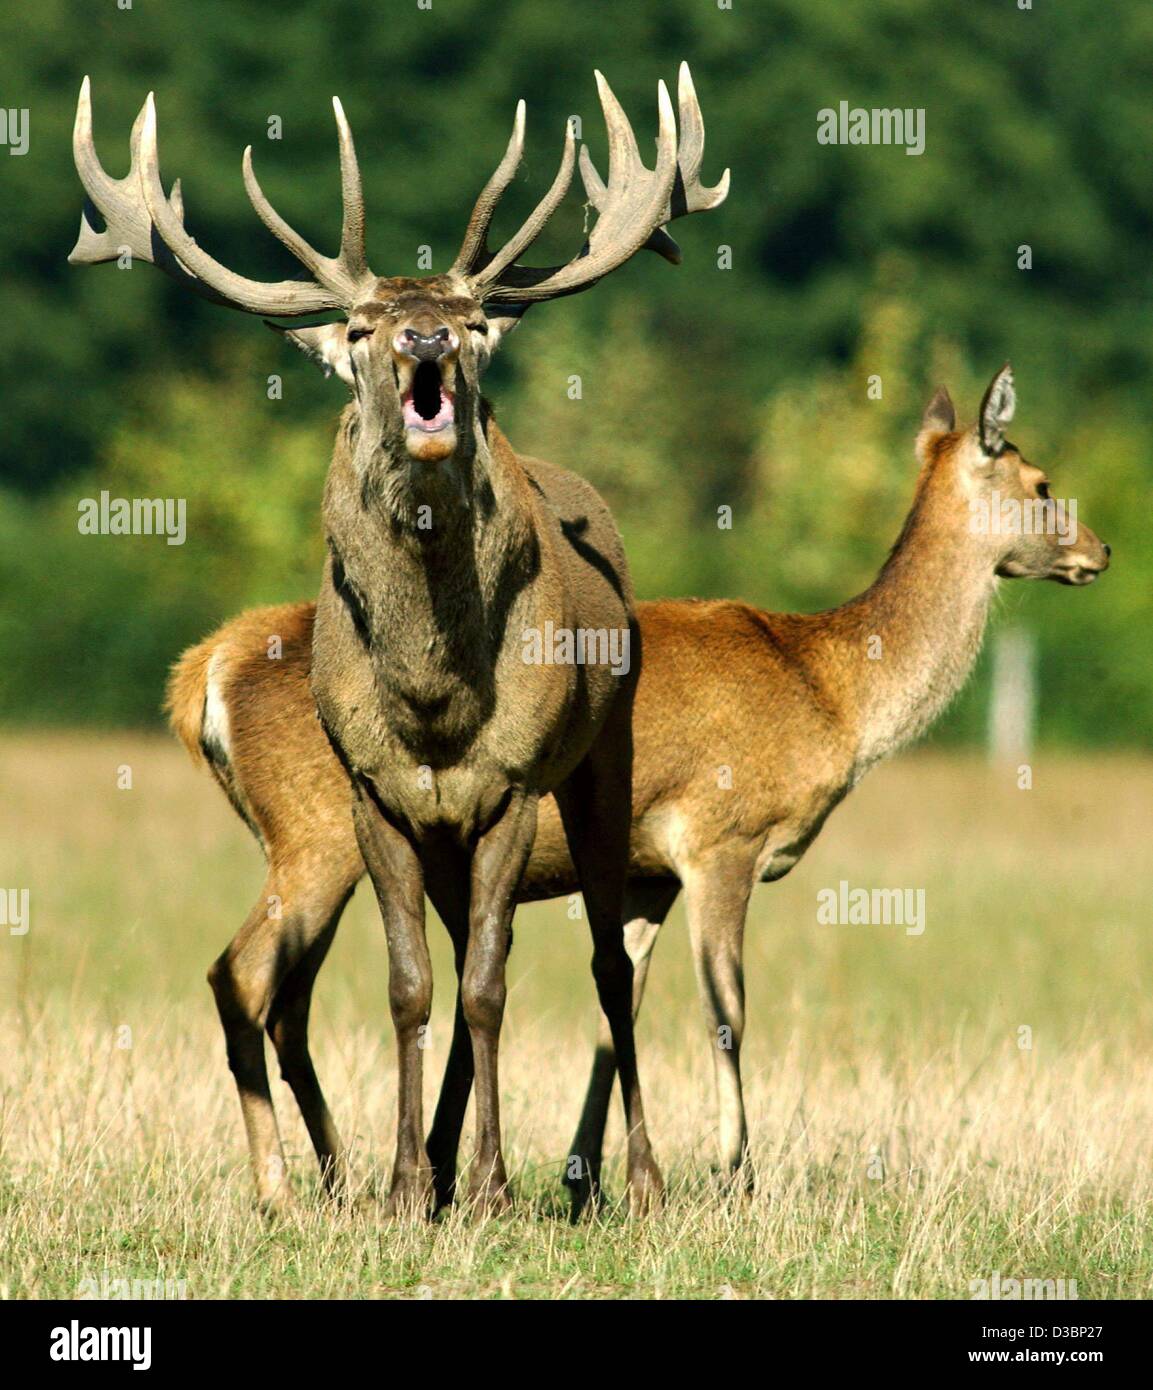 (dpa) - A red deer tries to impress a female animal with its rutting noises on the Hirschaue farm in Birkholz, Germany, 23 September 2003. On an area of around 100 hectares about 1,000 dams, deer and wild boars are kept. Stock Photo